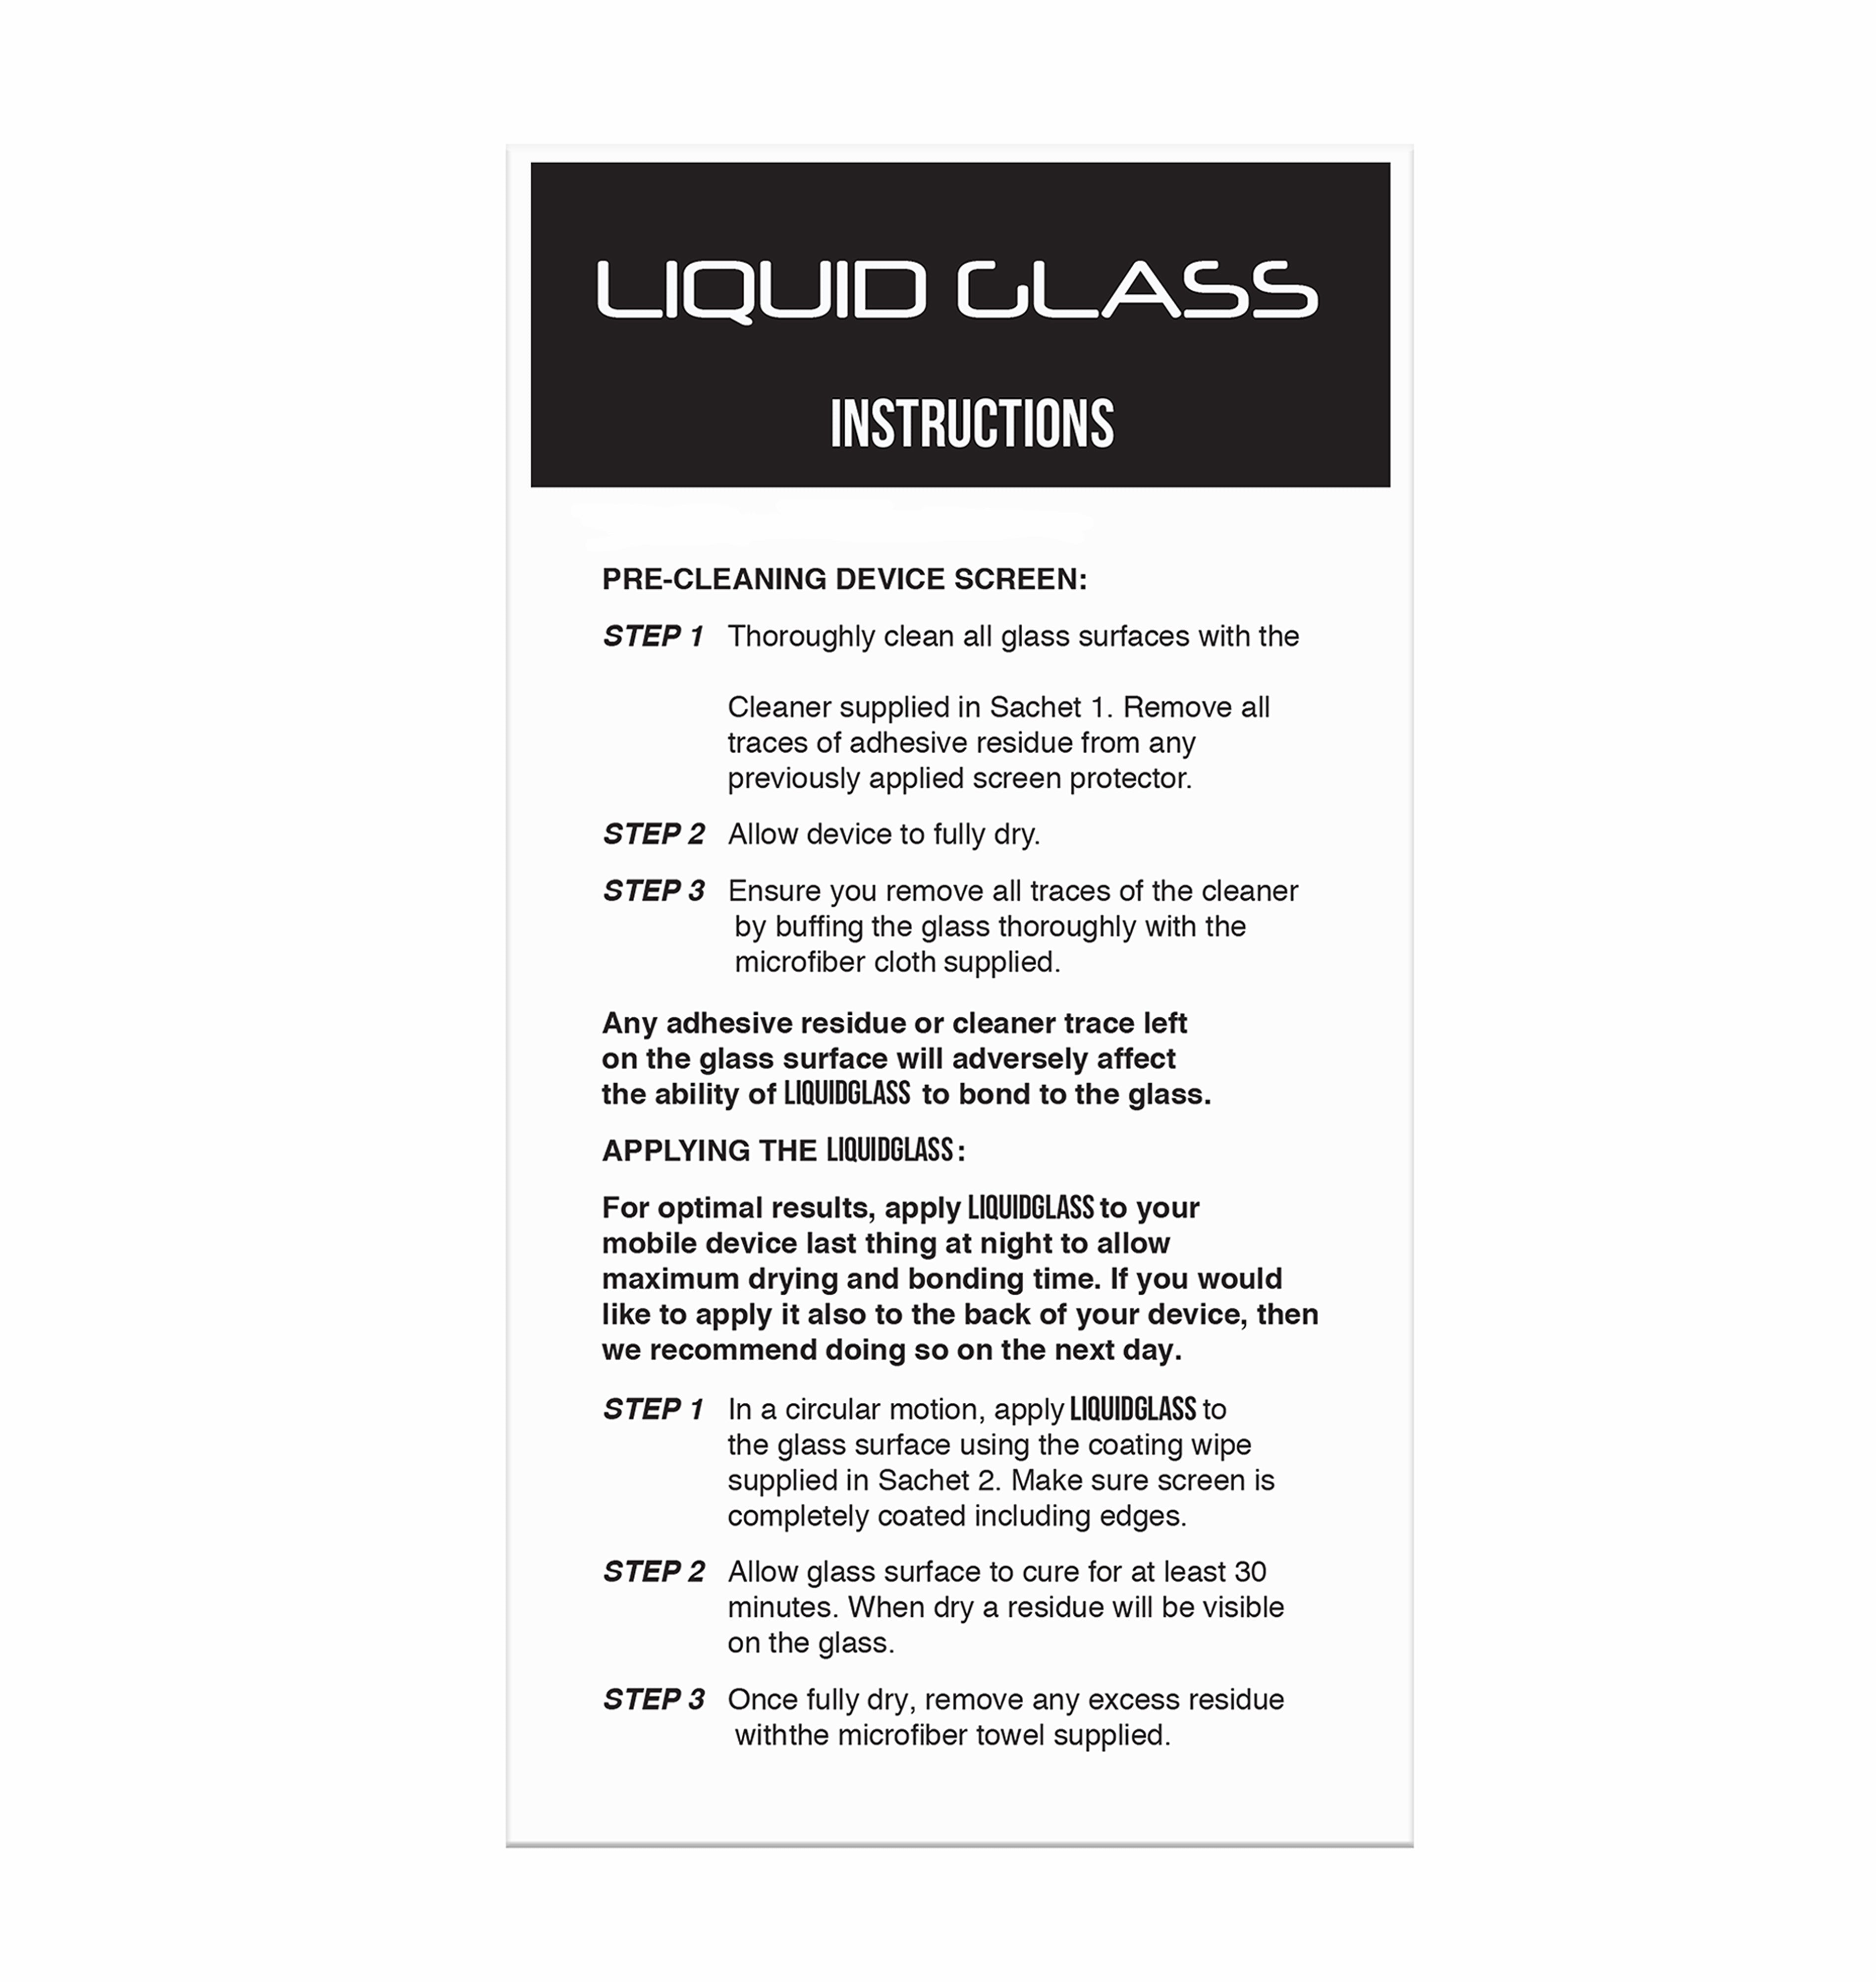 2 Pack ProofTech Liquid Glass Screen Protector for All Smartphones Tablets and Watches